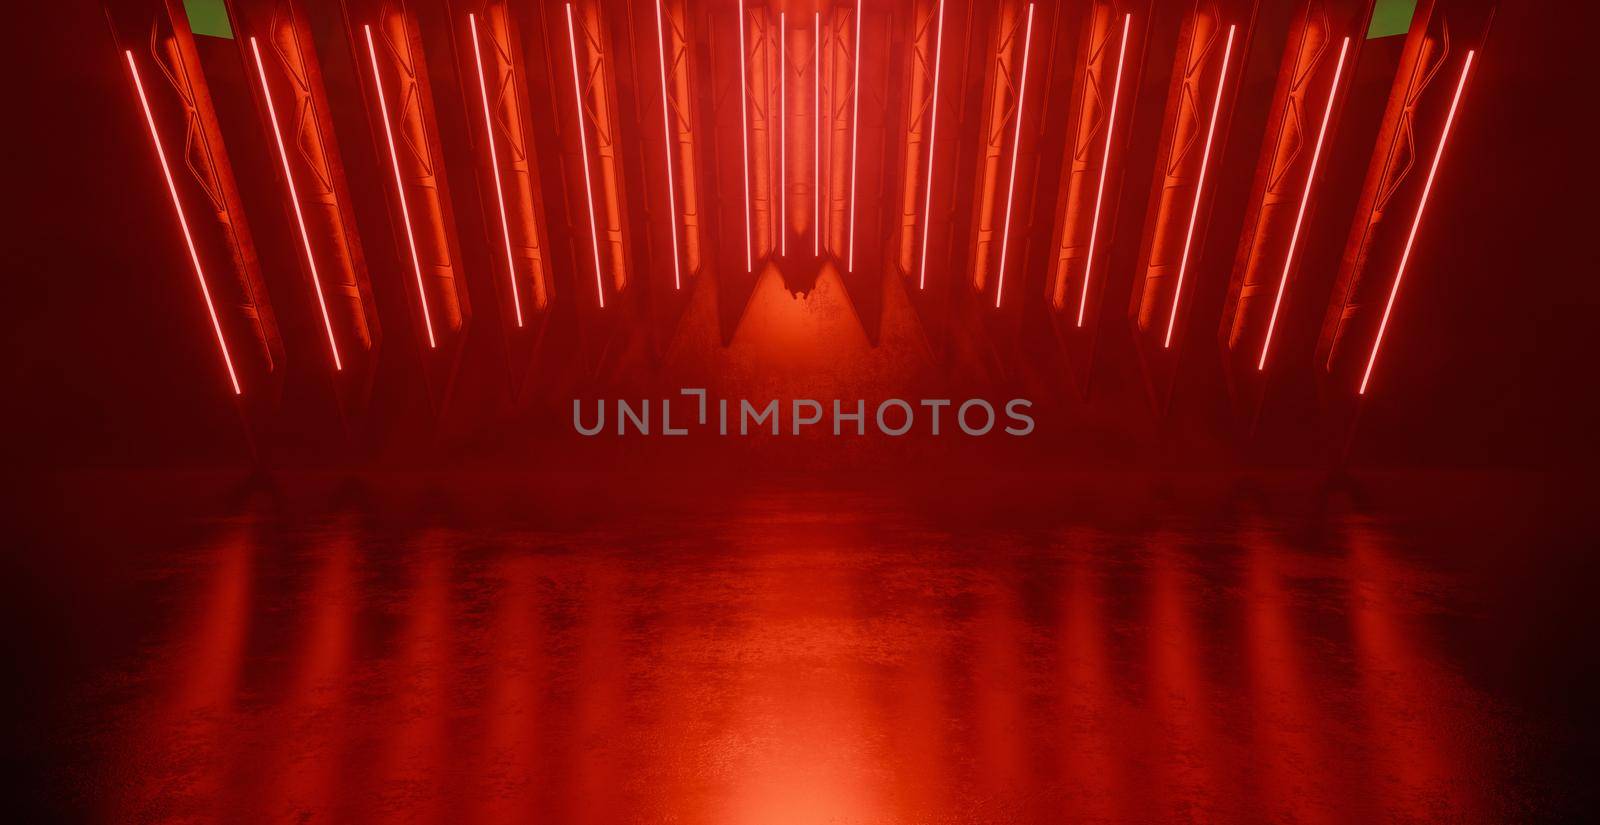 Extraordinary OuterSpace Vibrant Red Cyber Warehouse Futuristic Interior Banner Background Wallpaper 3D Render